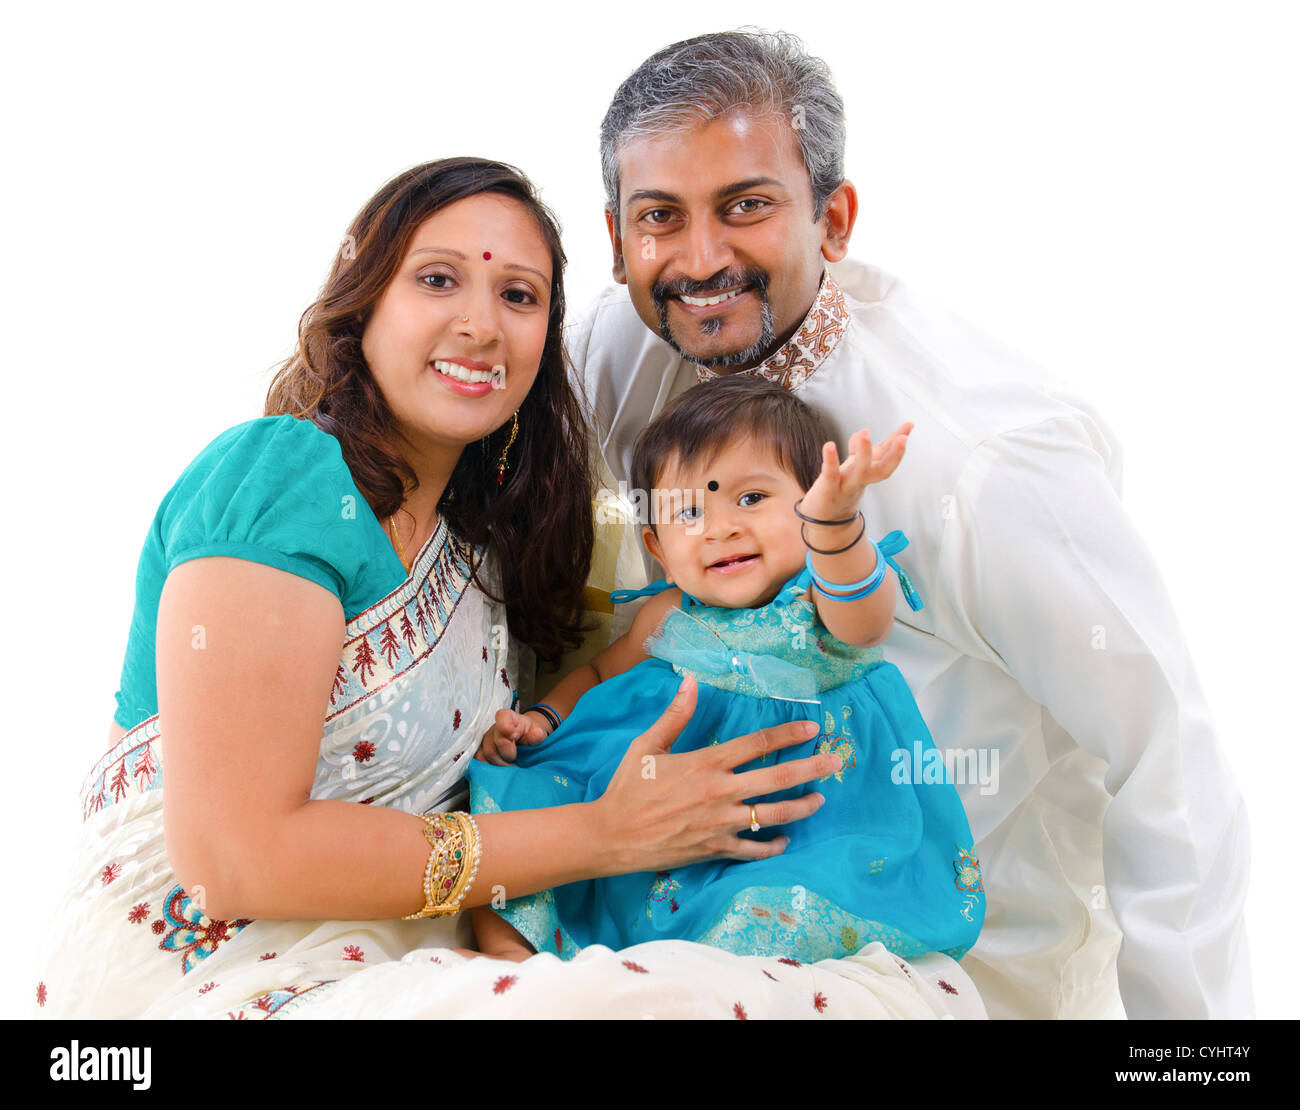 South Indian Family standing pose Stock Photo - Alamy